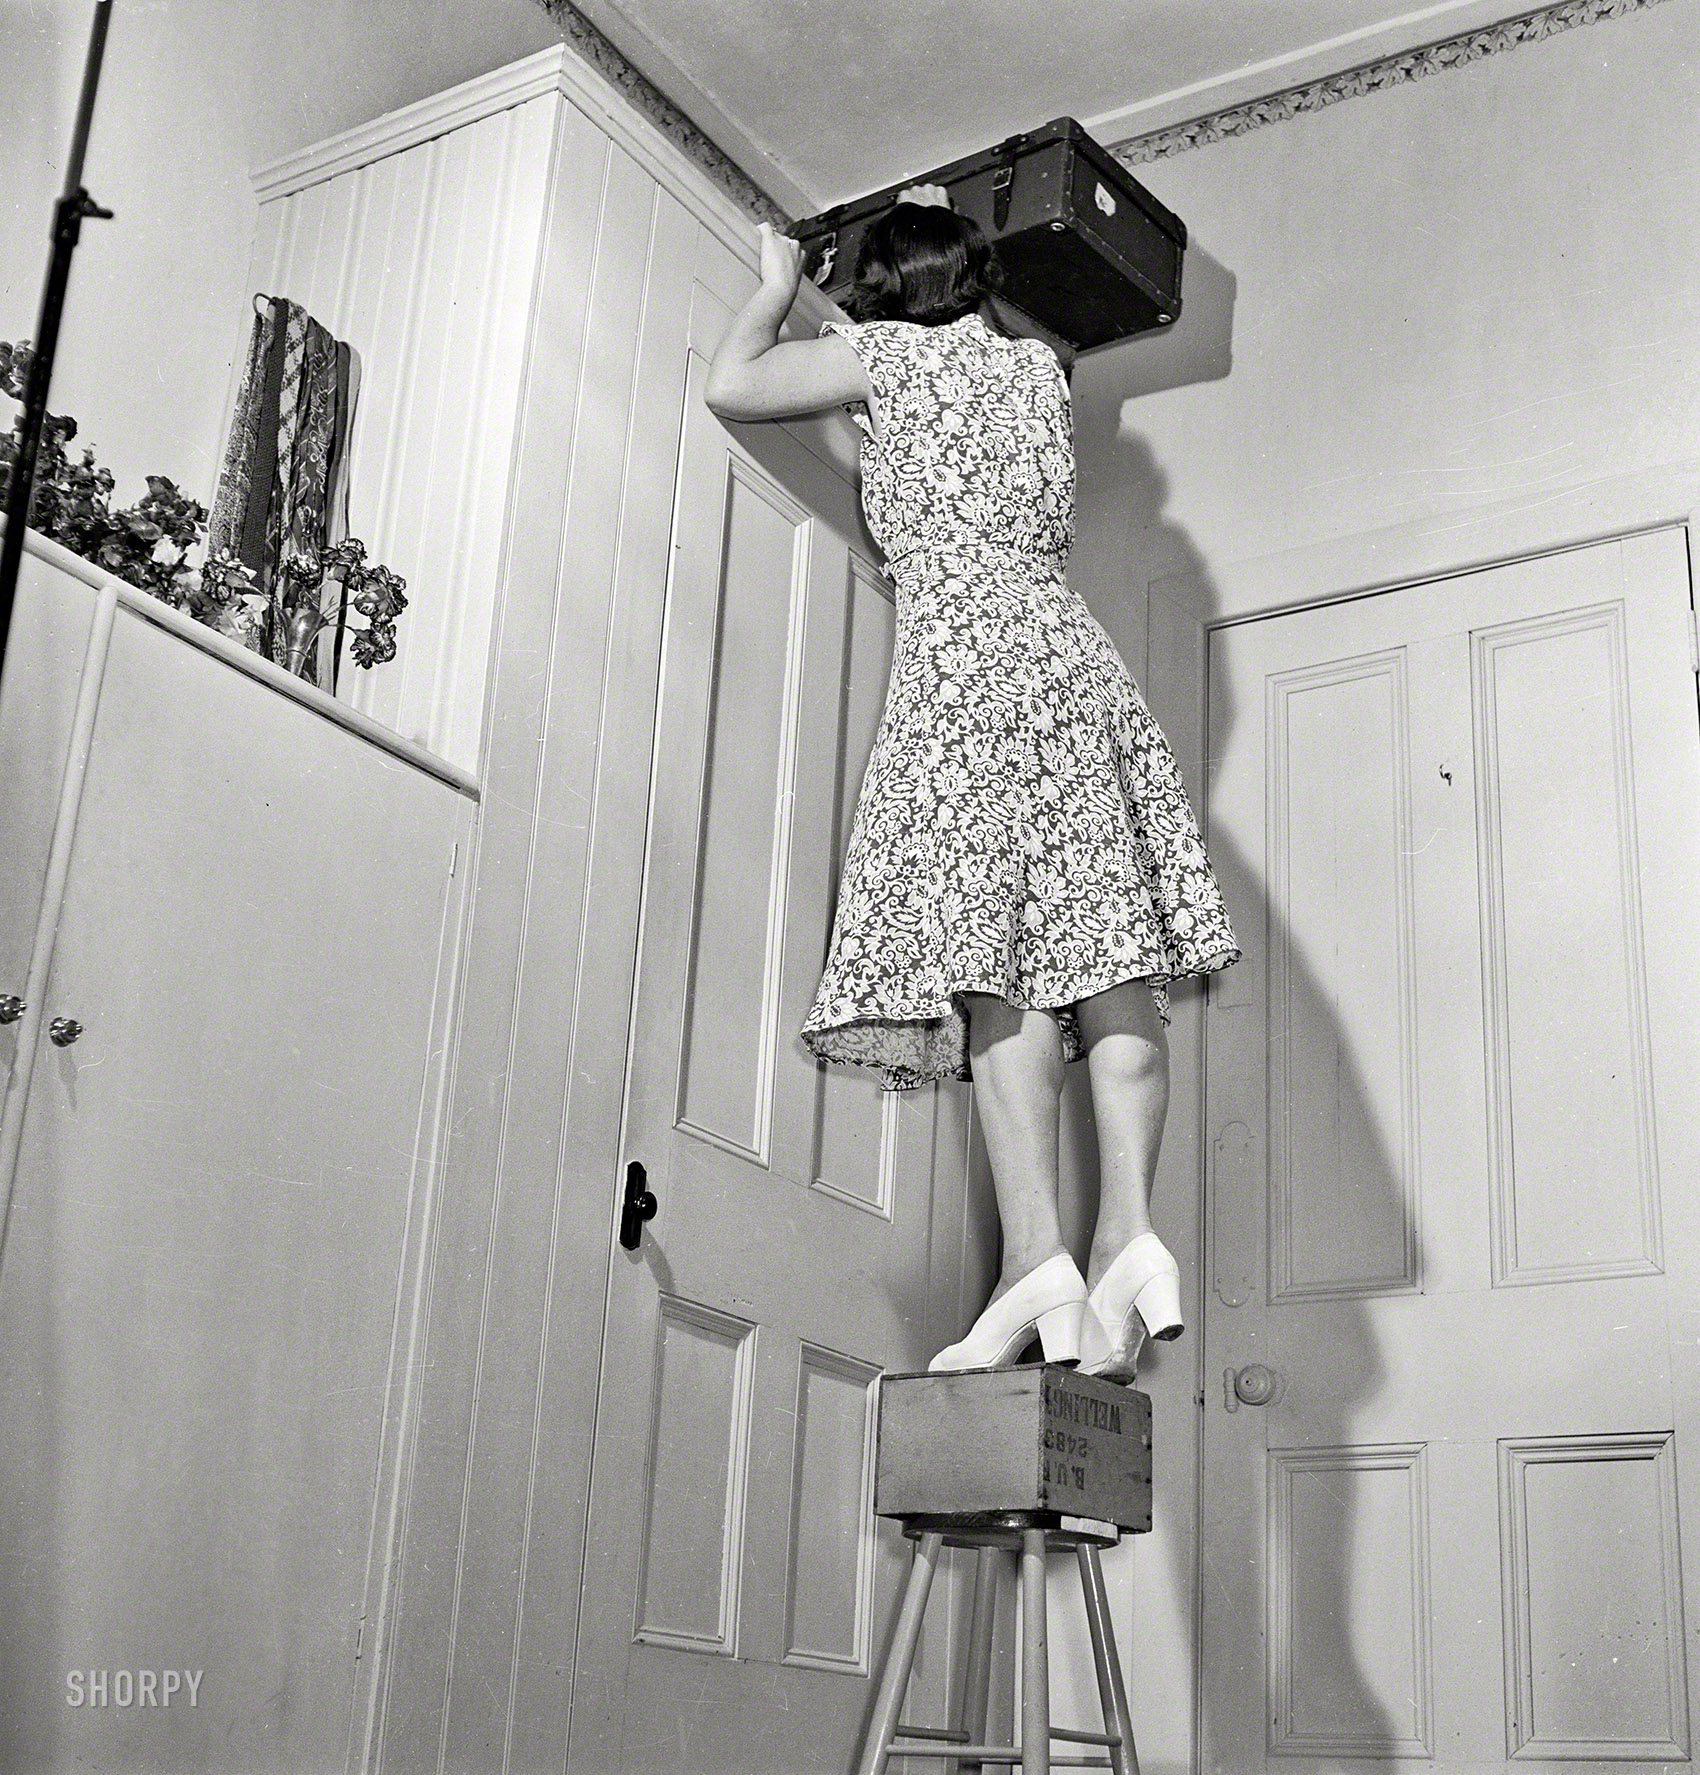 Jan. 19, 1951. "Common accidents in the home." The Accident Lady is back. Have a nice trip! Wellington, New Zealand, Evening Post photo. View full size.